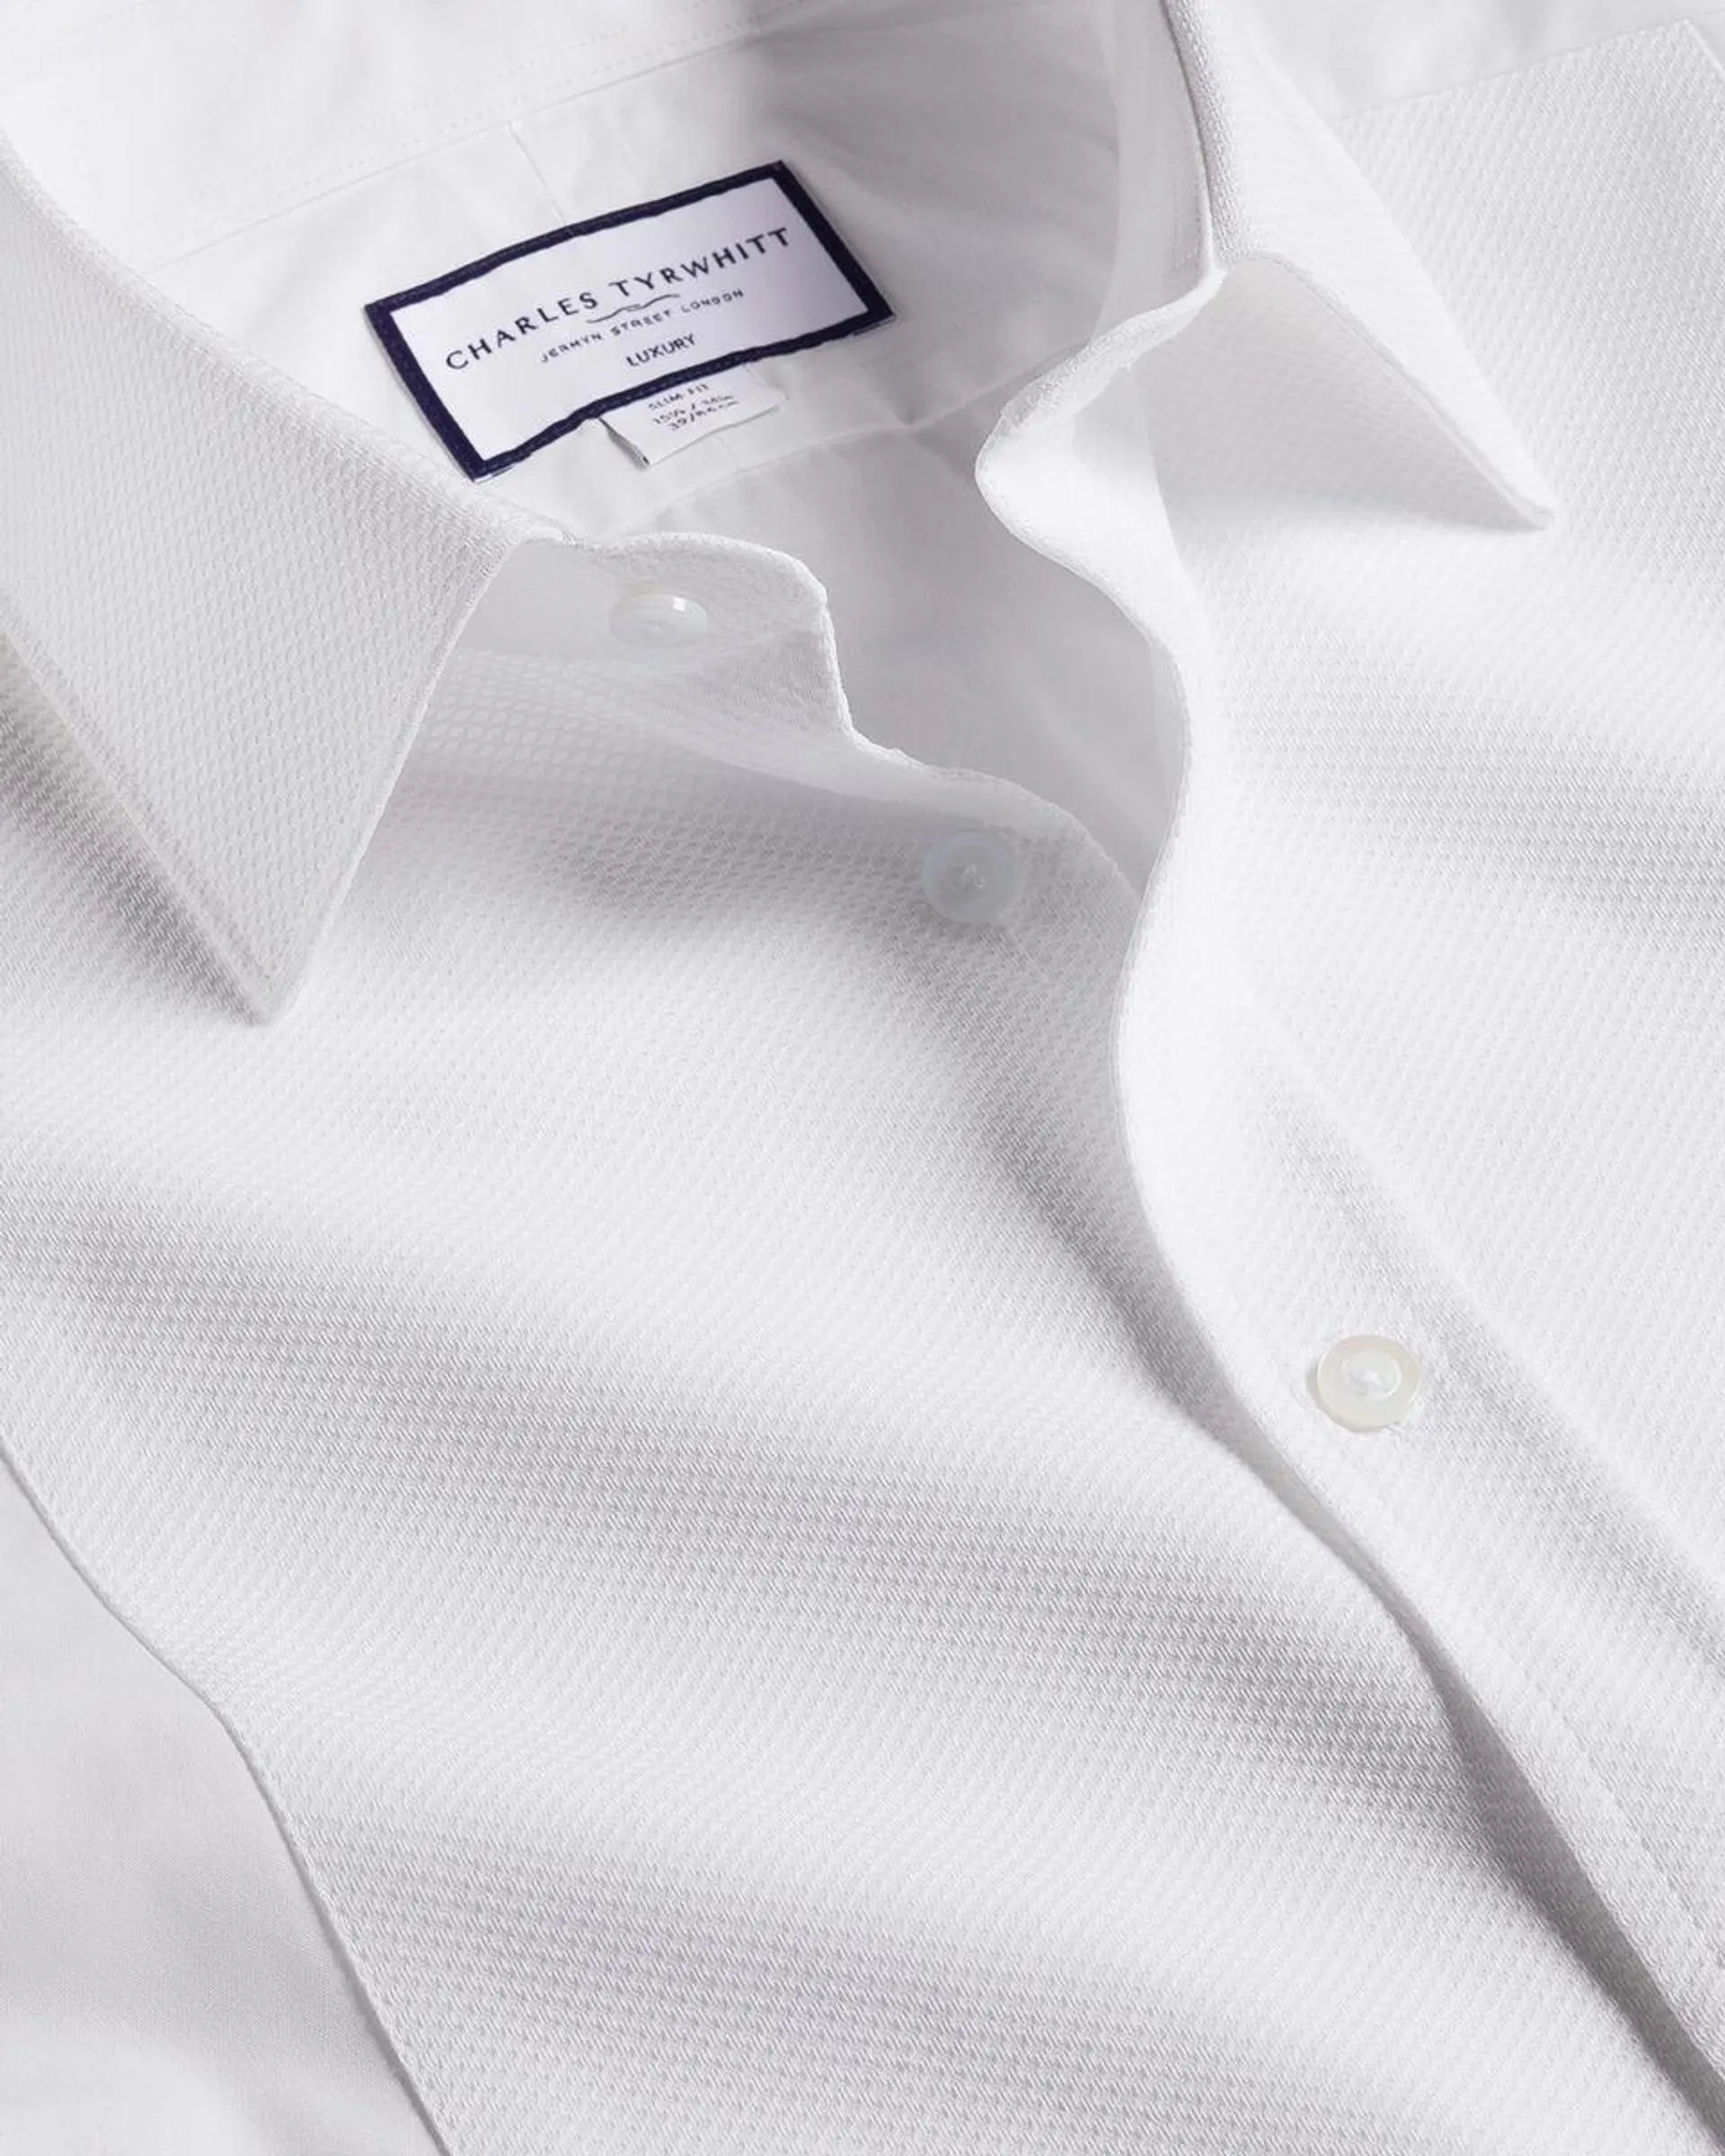 details about product: Marcella Bib Evening Shirt - White